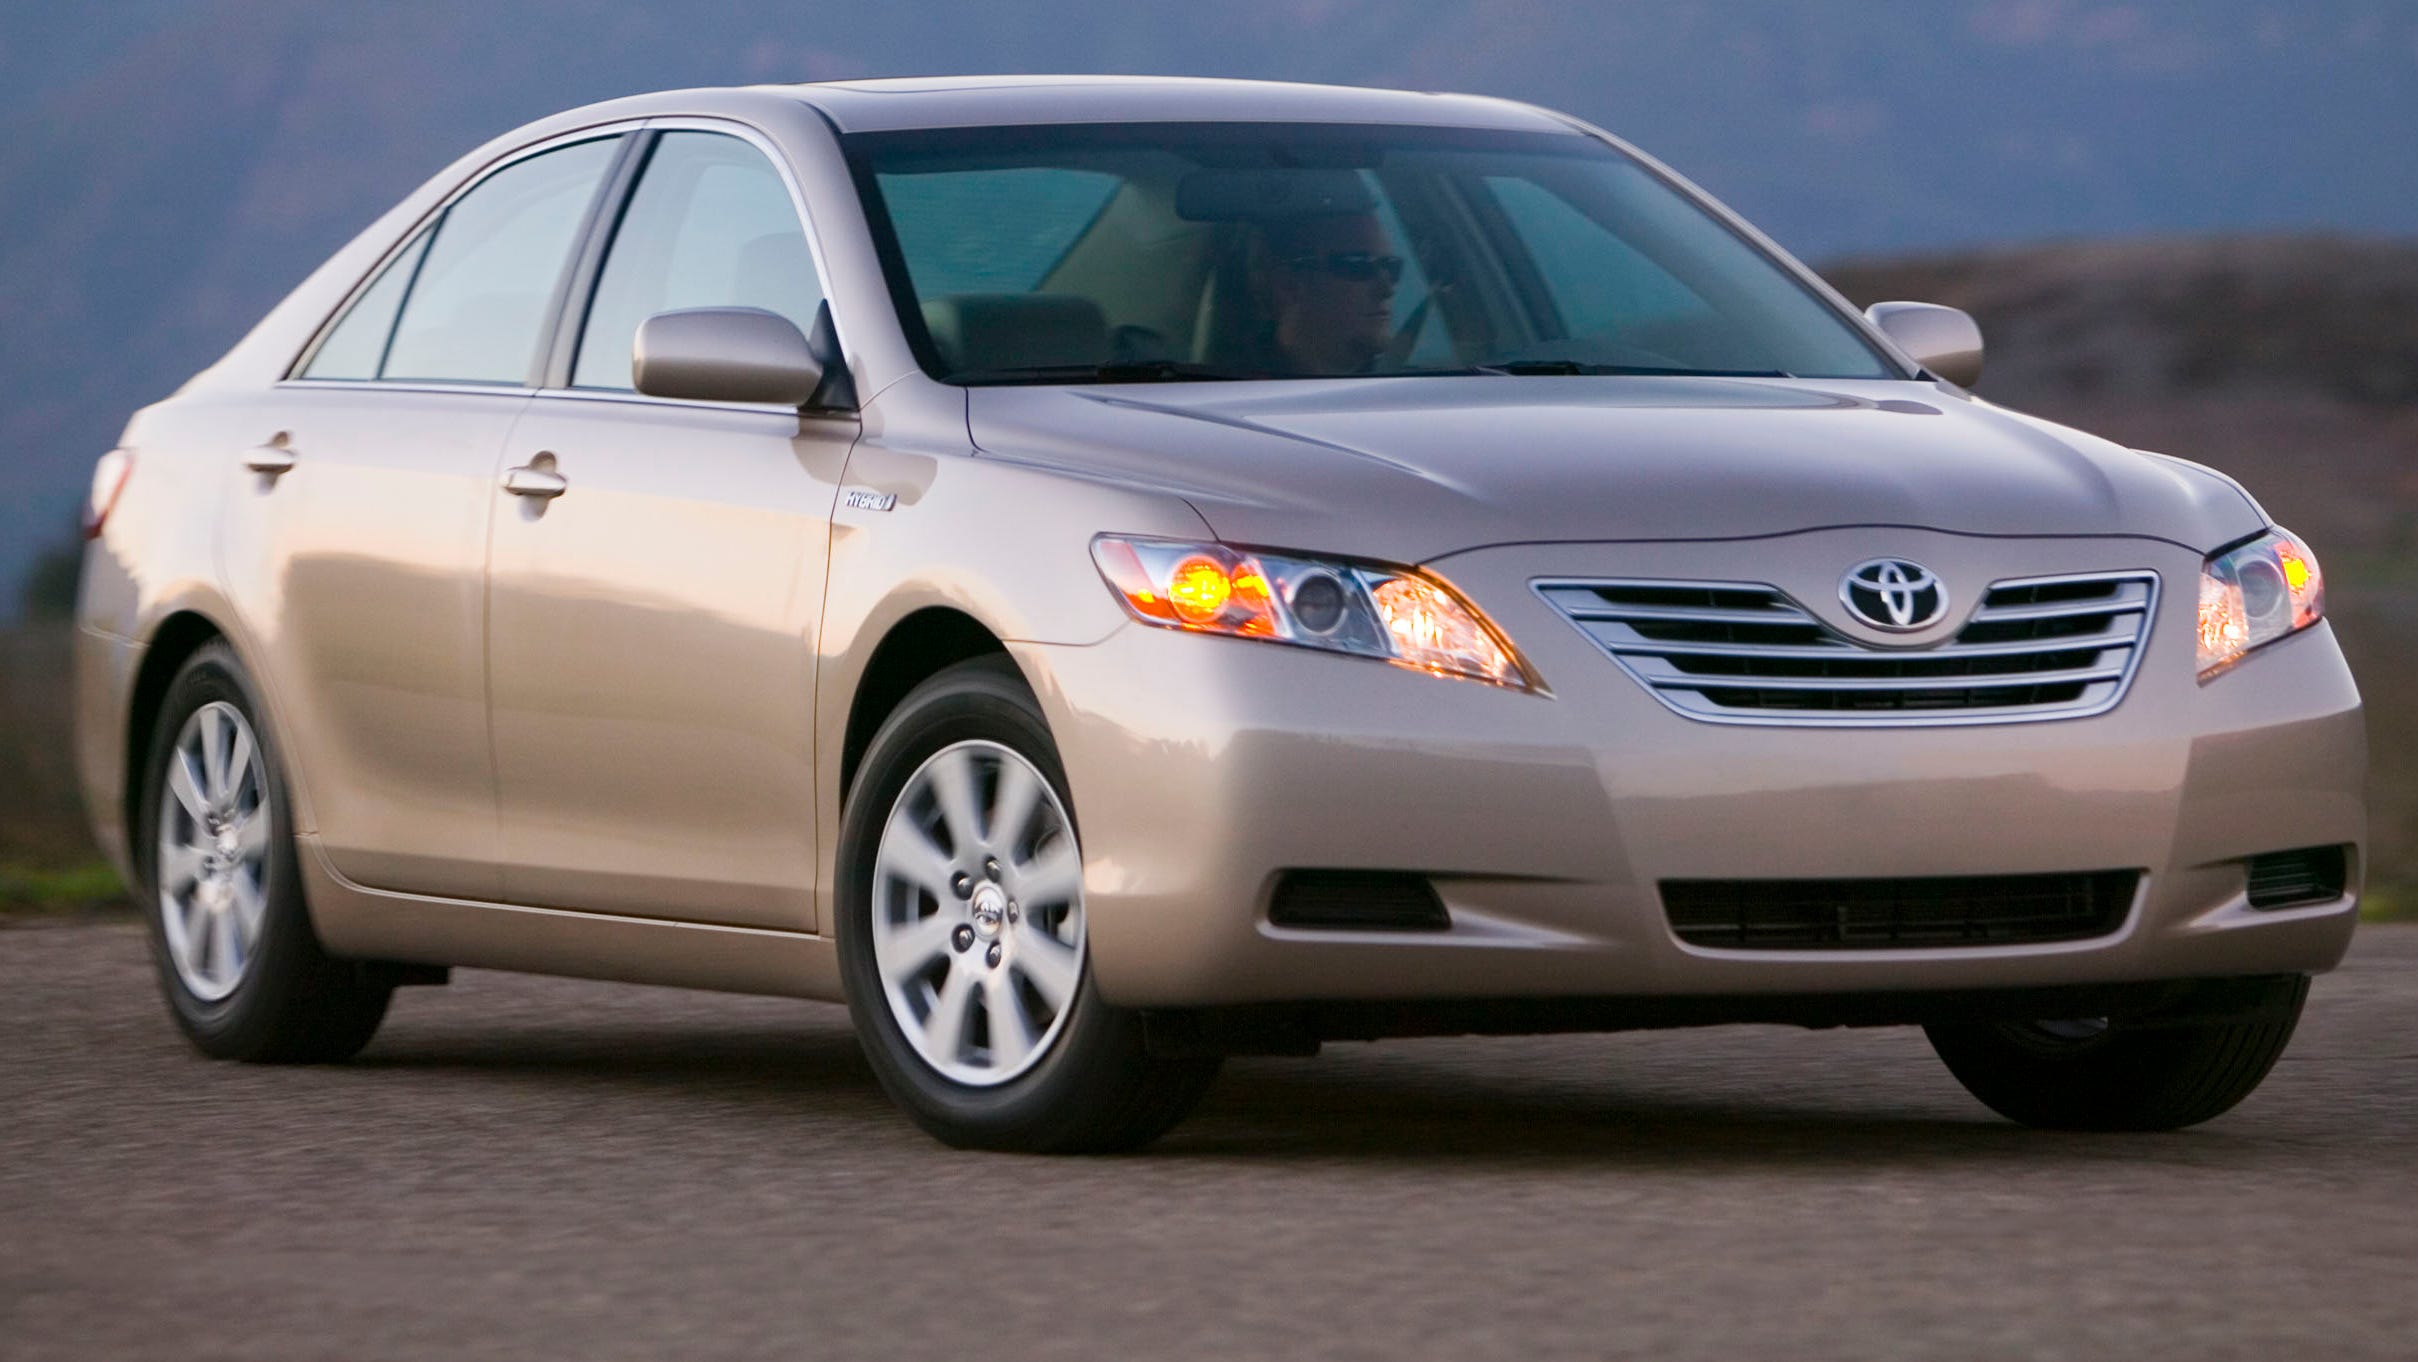 Consumer Reports urges recall of Toyota Camry Hybrid